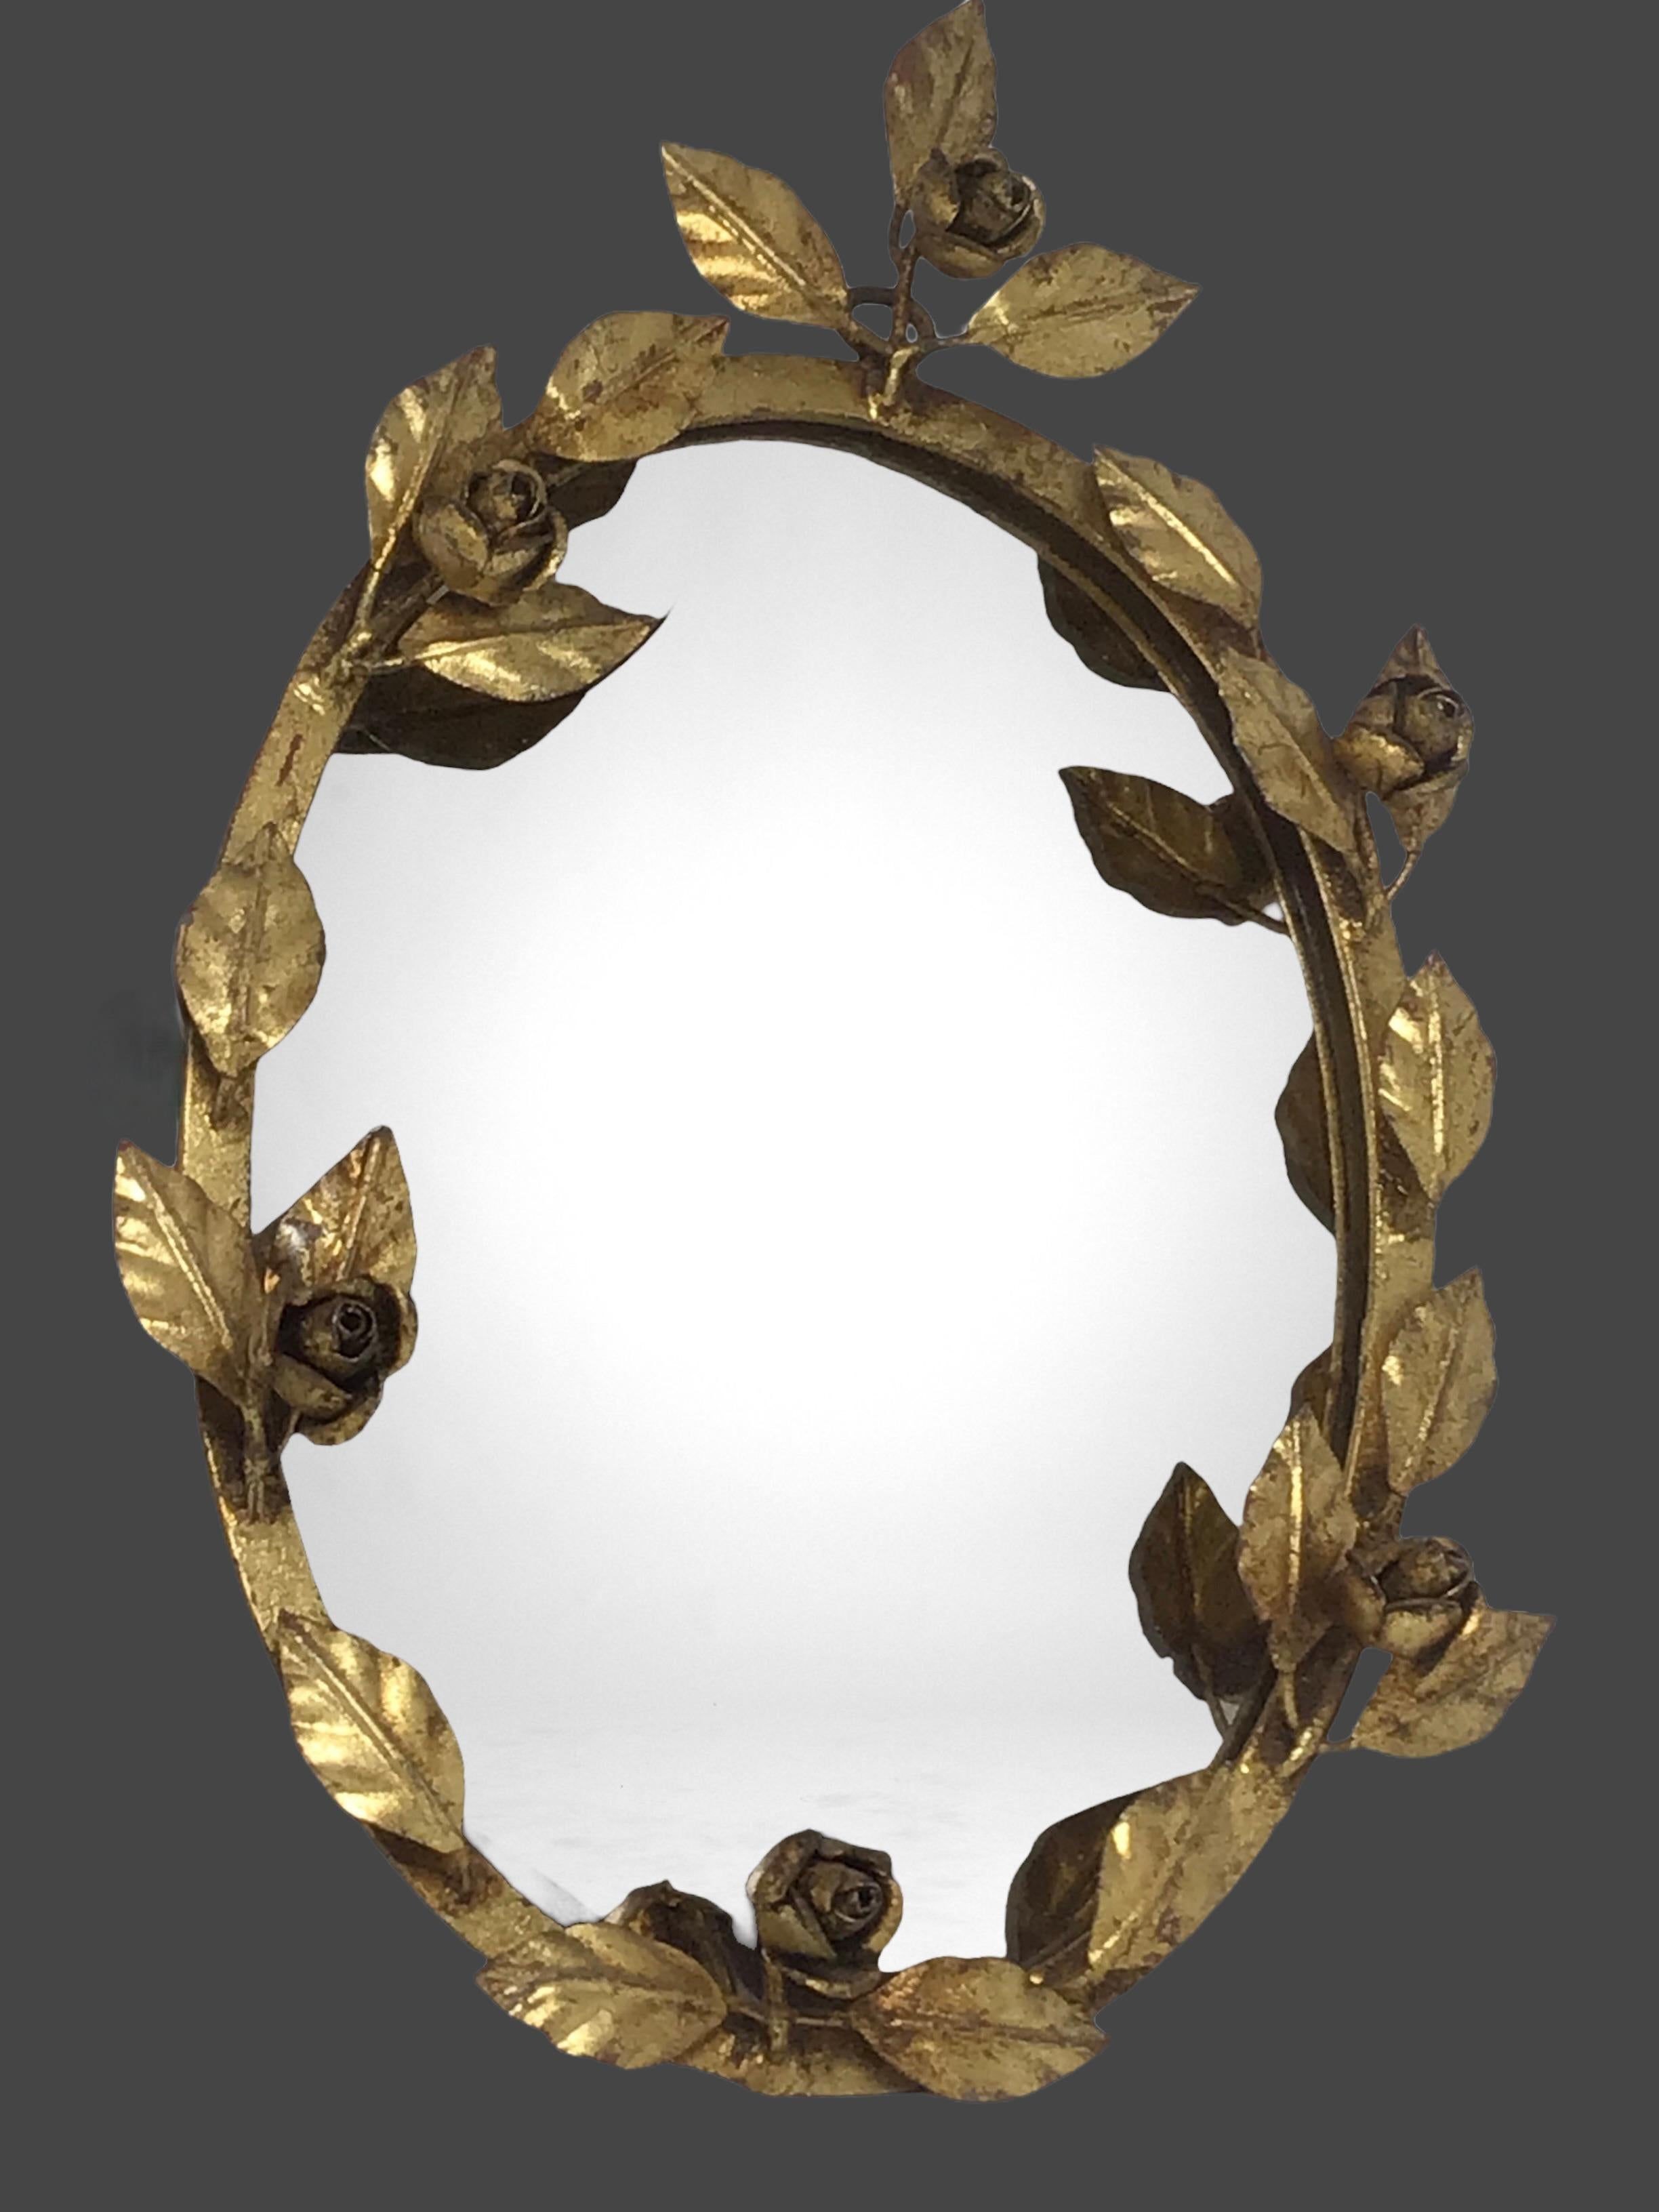 A gorgeous Hollywood Regency mirror. Made of gilded metal. Mirror in good condition, like seen in the pictures. Mirror glass in smoked color. The metal with patina, but this is old-age. A nice addition to any room.